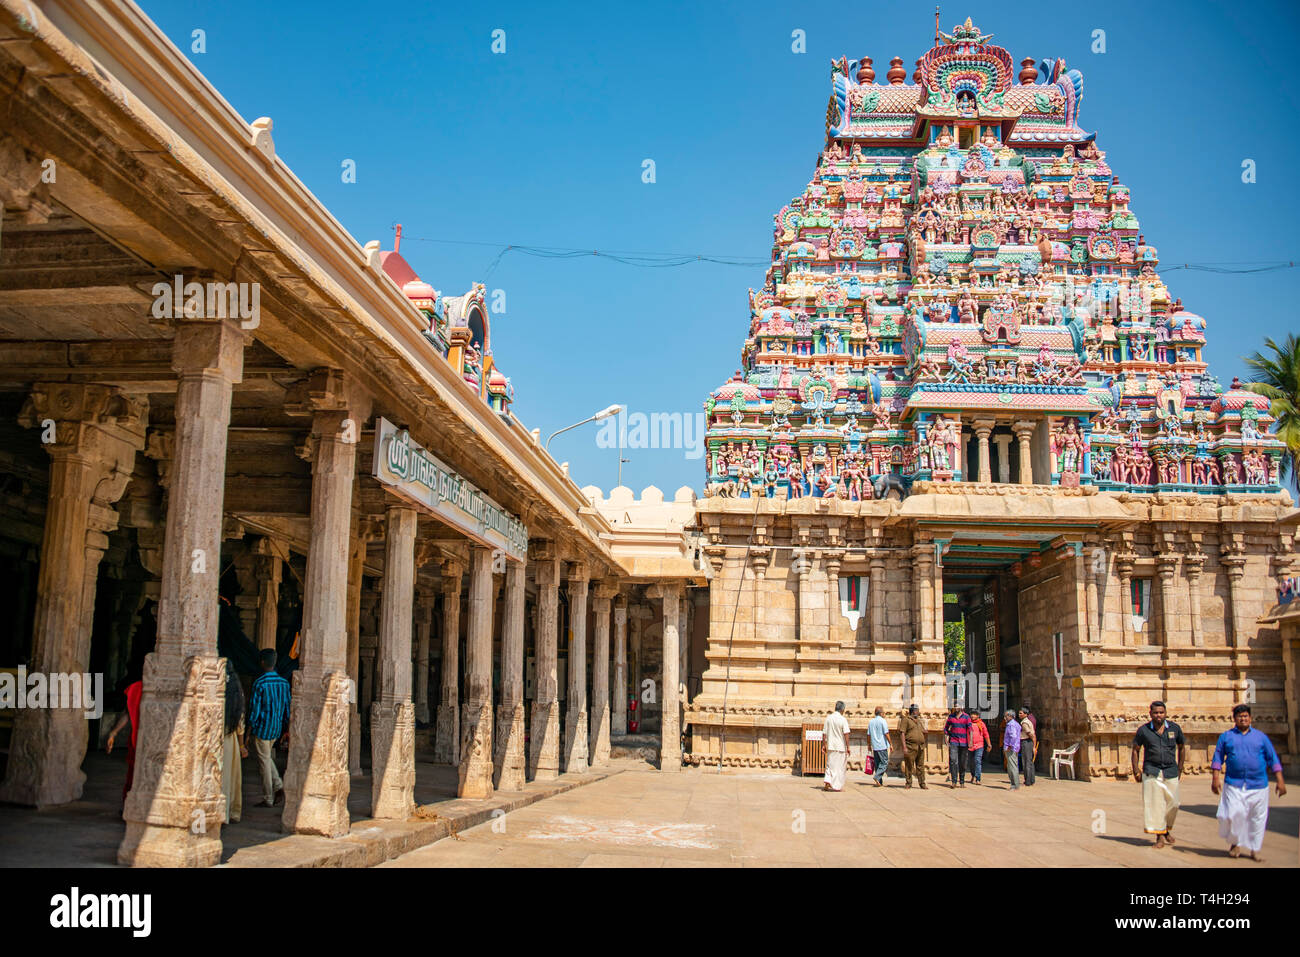 Horizontal view inside the Sri Ranganathaswamy Temple complex in Trichy, India. Stock Photo